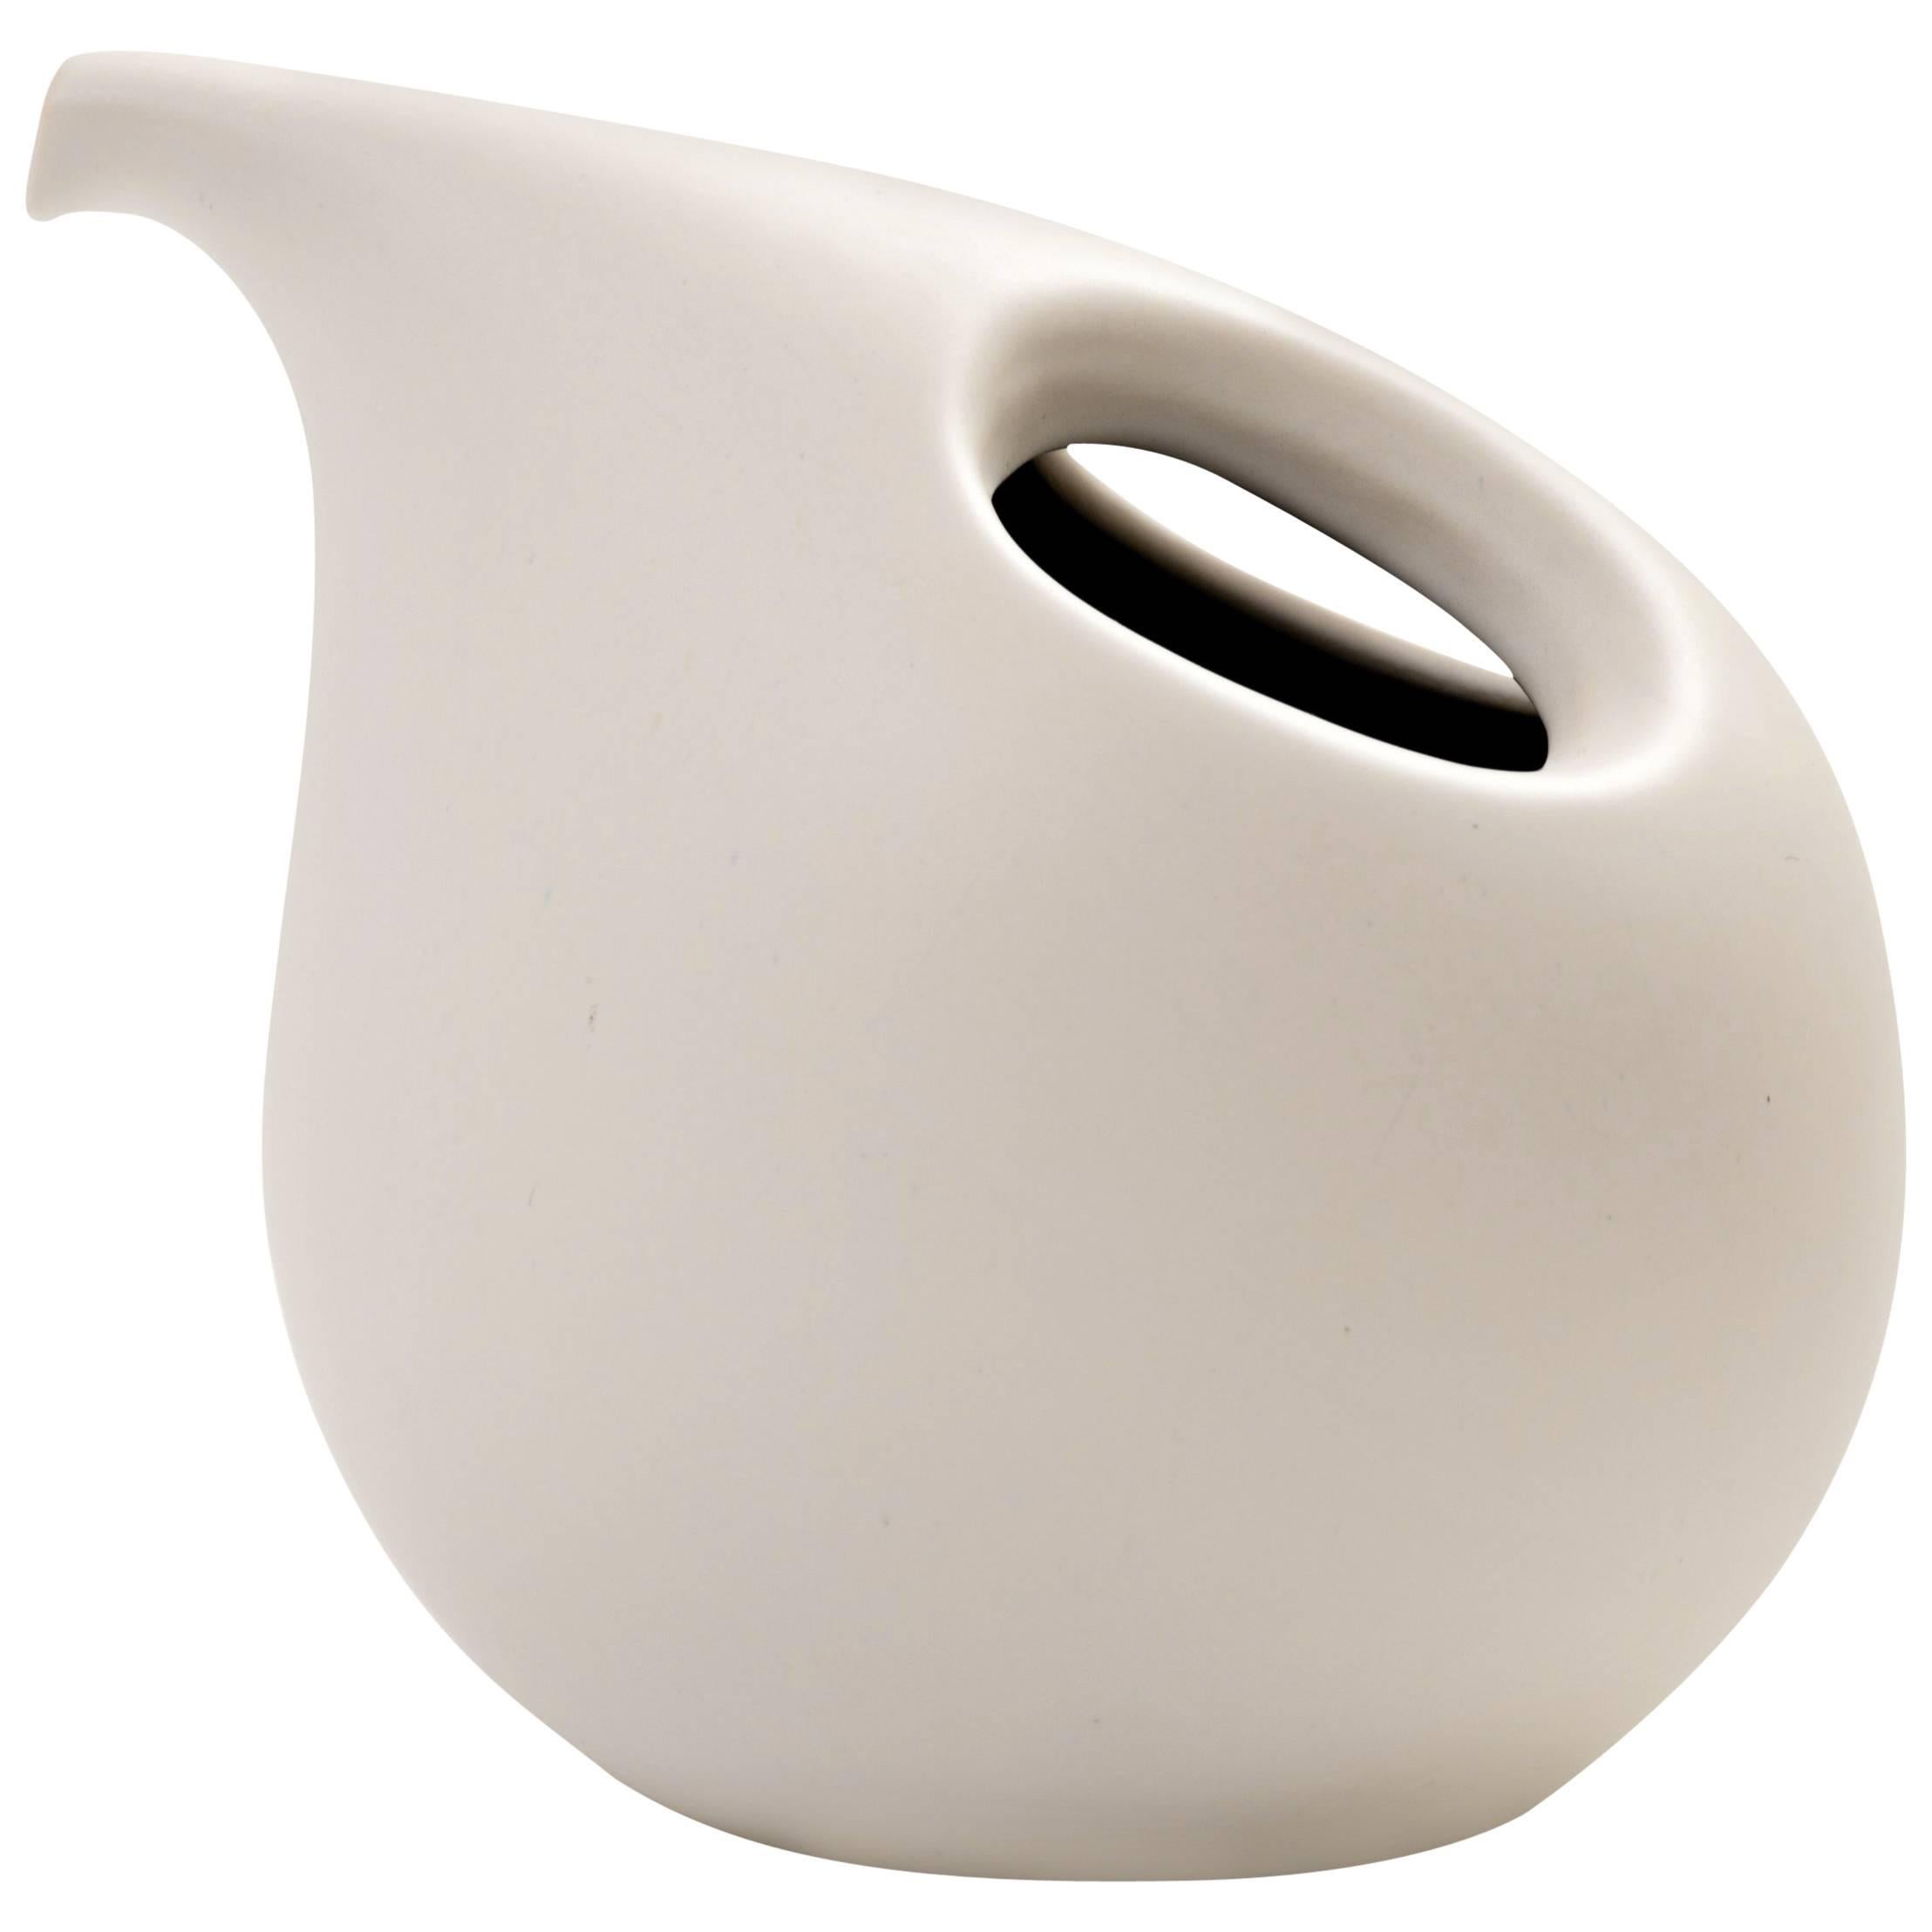 Modernist White Ceramic Vase with Handle, 1960s For Sale